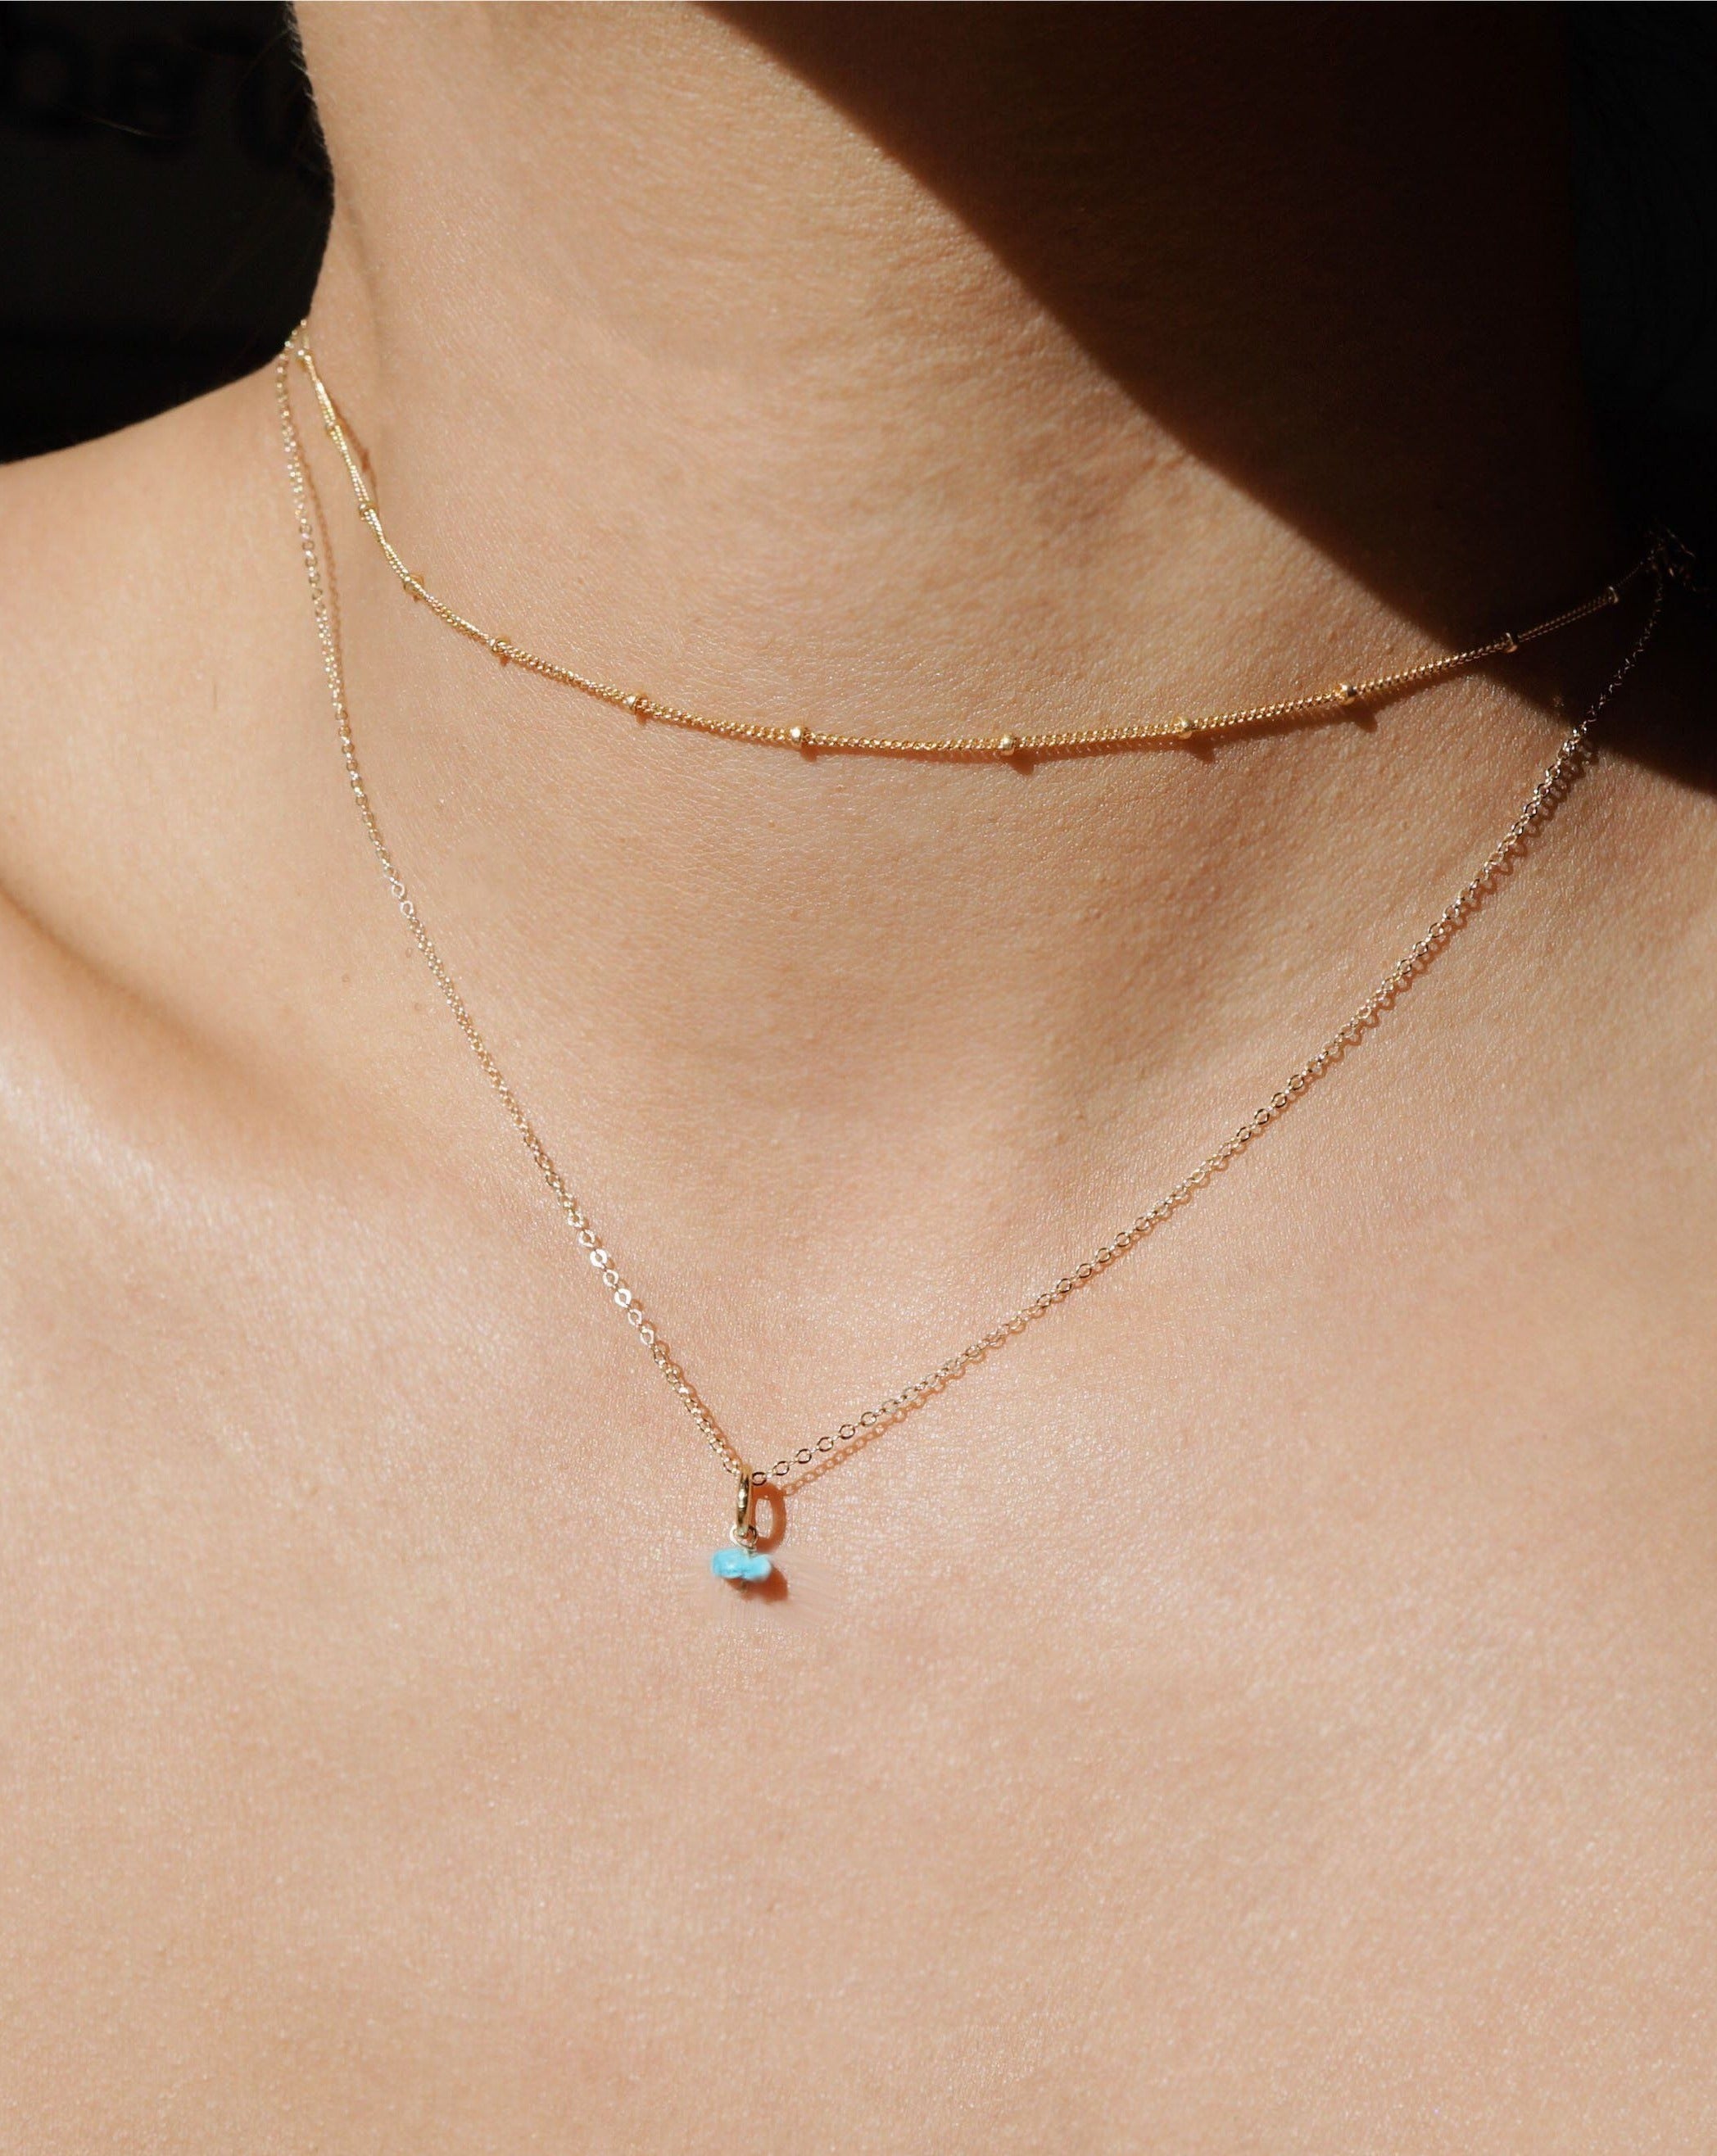 One Love Birthstone Necklace by KOZAKH. A necklace crafted in 14K Gold Filled, featuring customizable Birthstone charms and is available in 4 adjustable lengths.